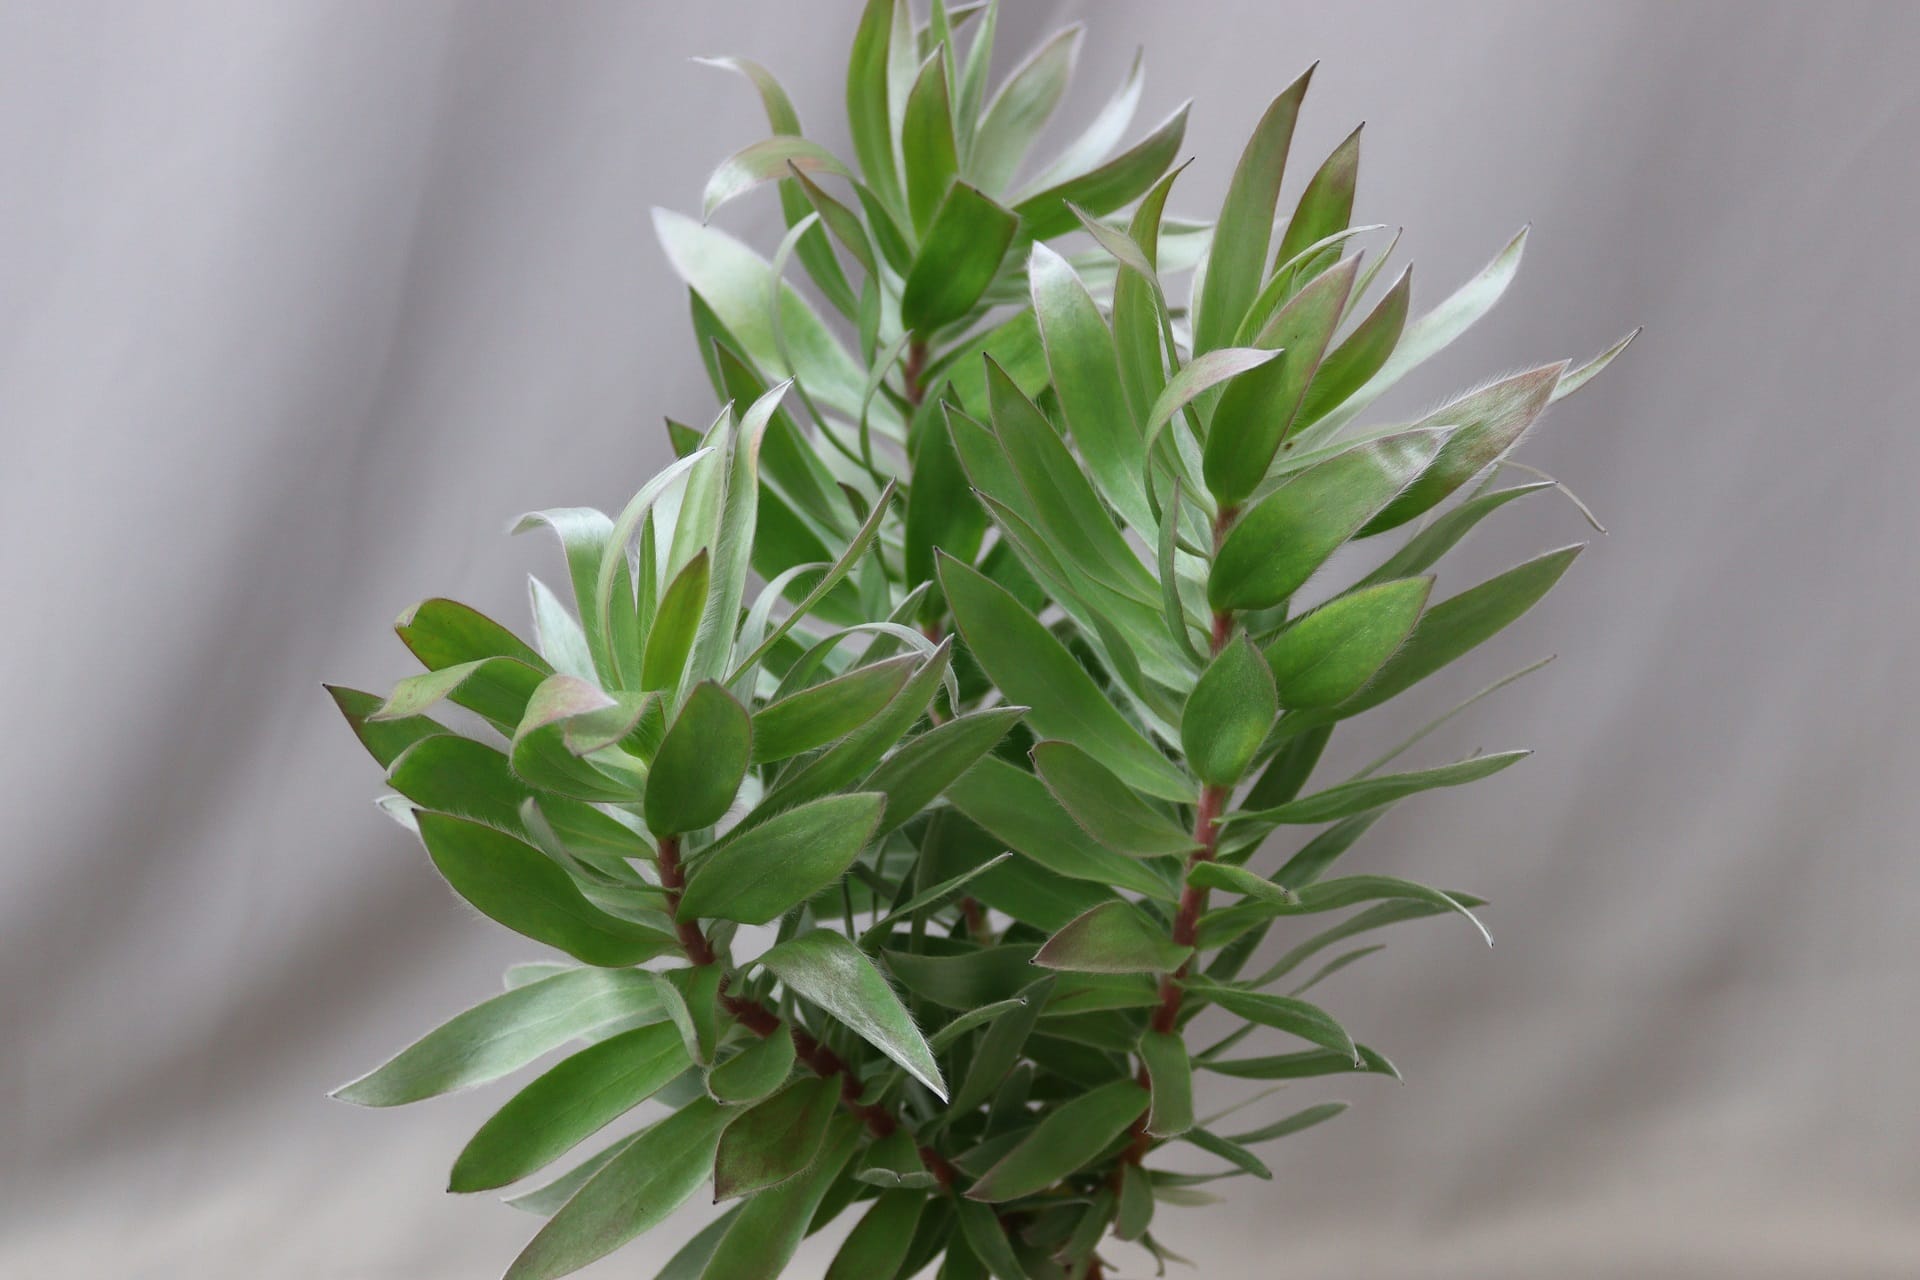 Close-up of a Leucadendron Silver tree. The leaves are silvery green and the stems reddish.